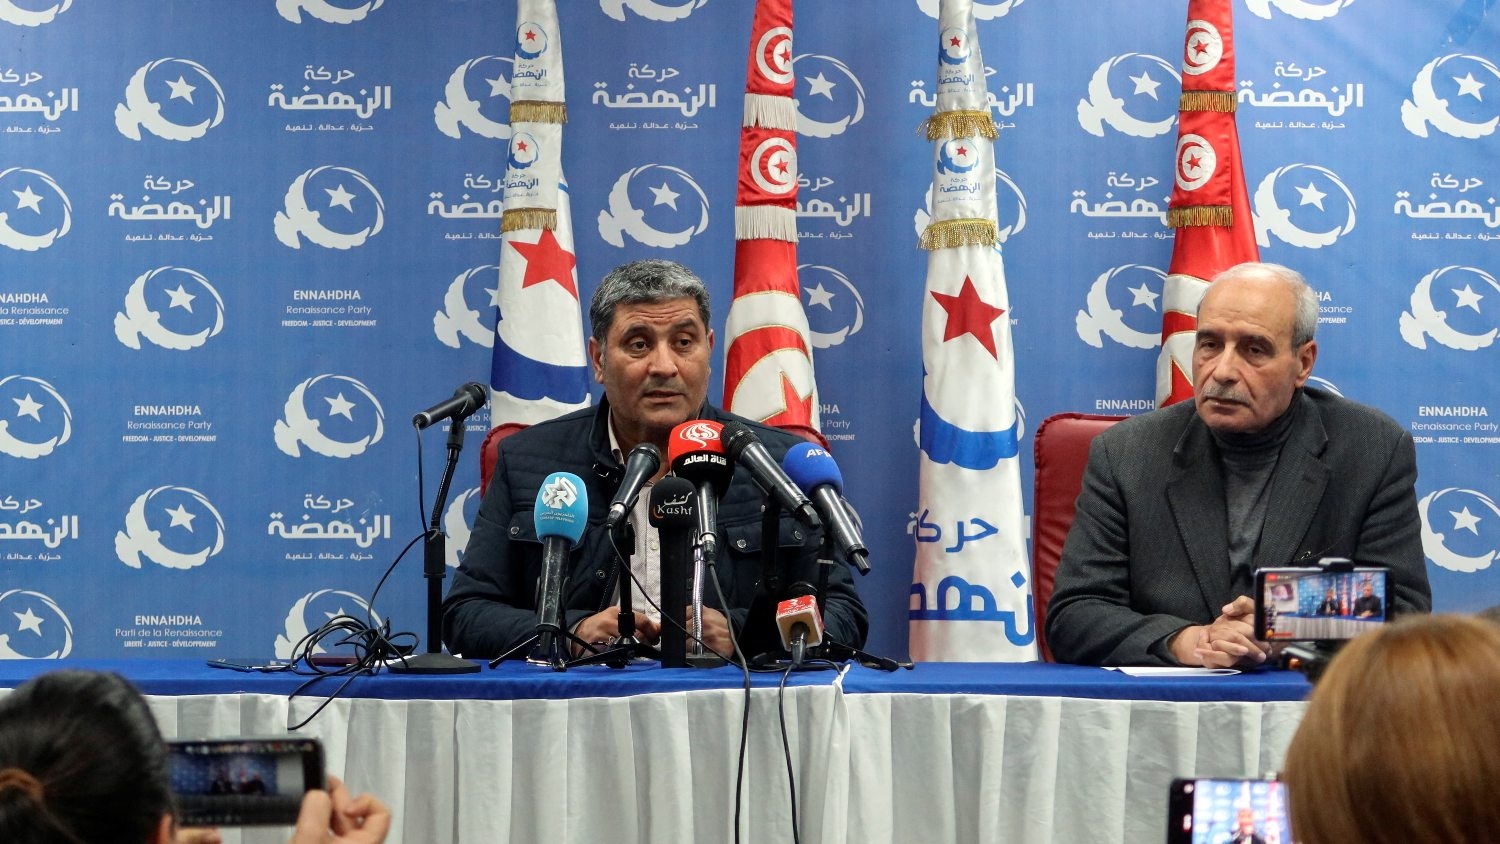 Mondher Ounissi, then the vice president of Ennahda party, speaks during a news conference at the party headquarters in Tunis, Tunisia on 17 April 2023.